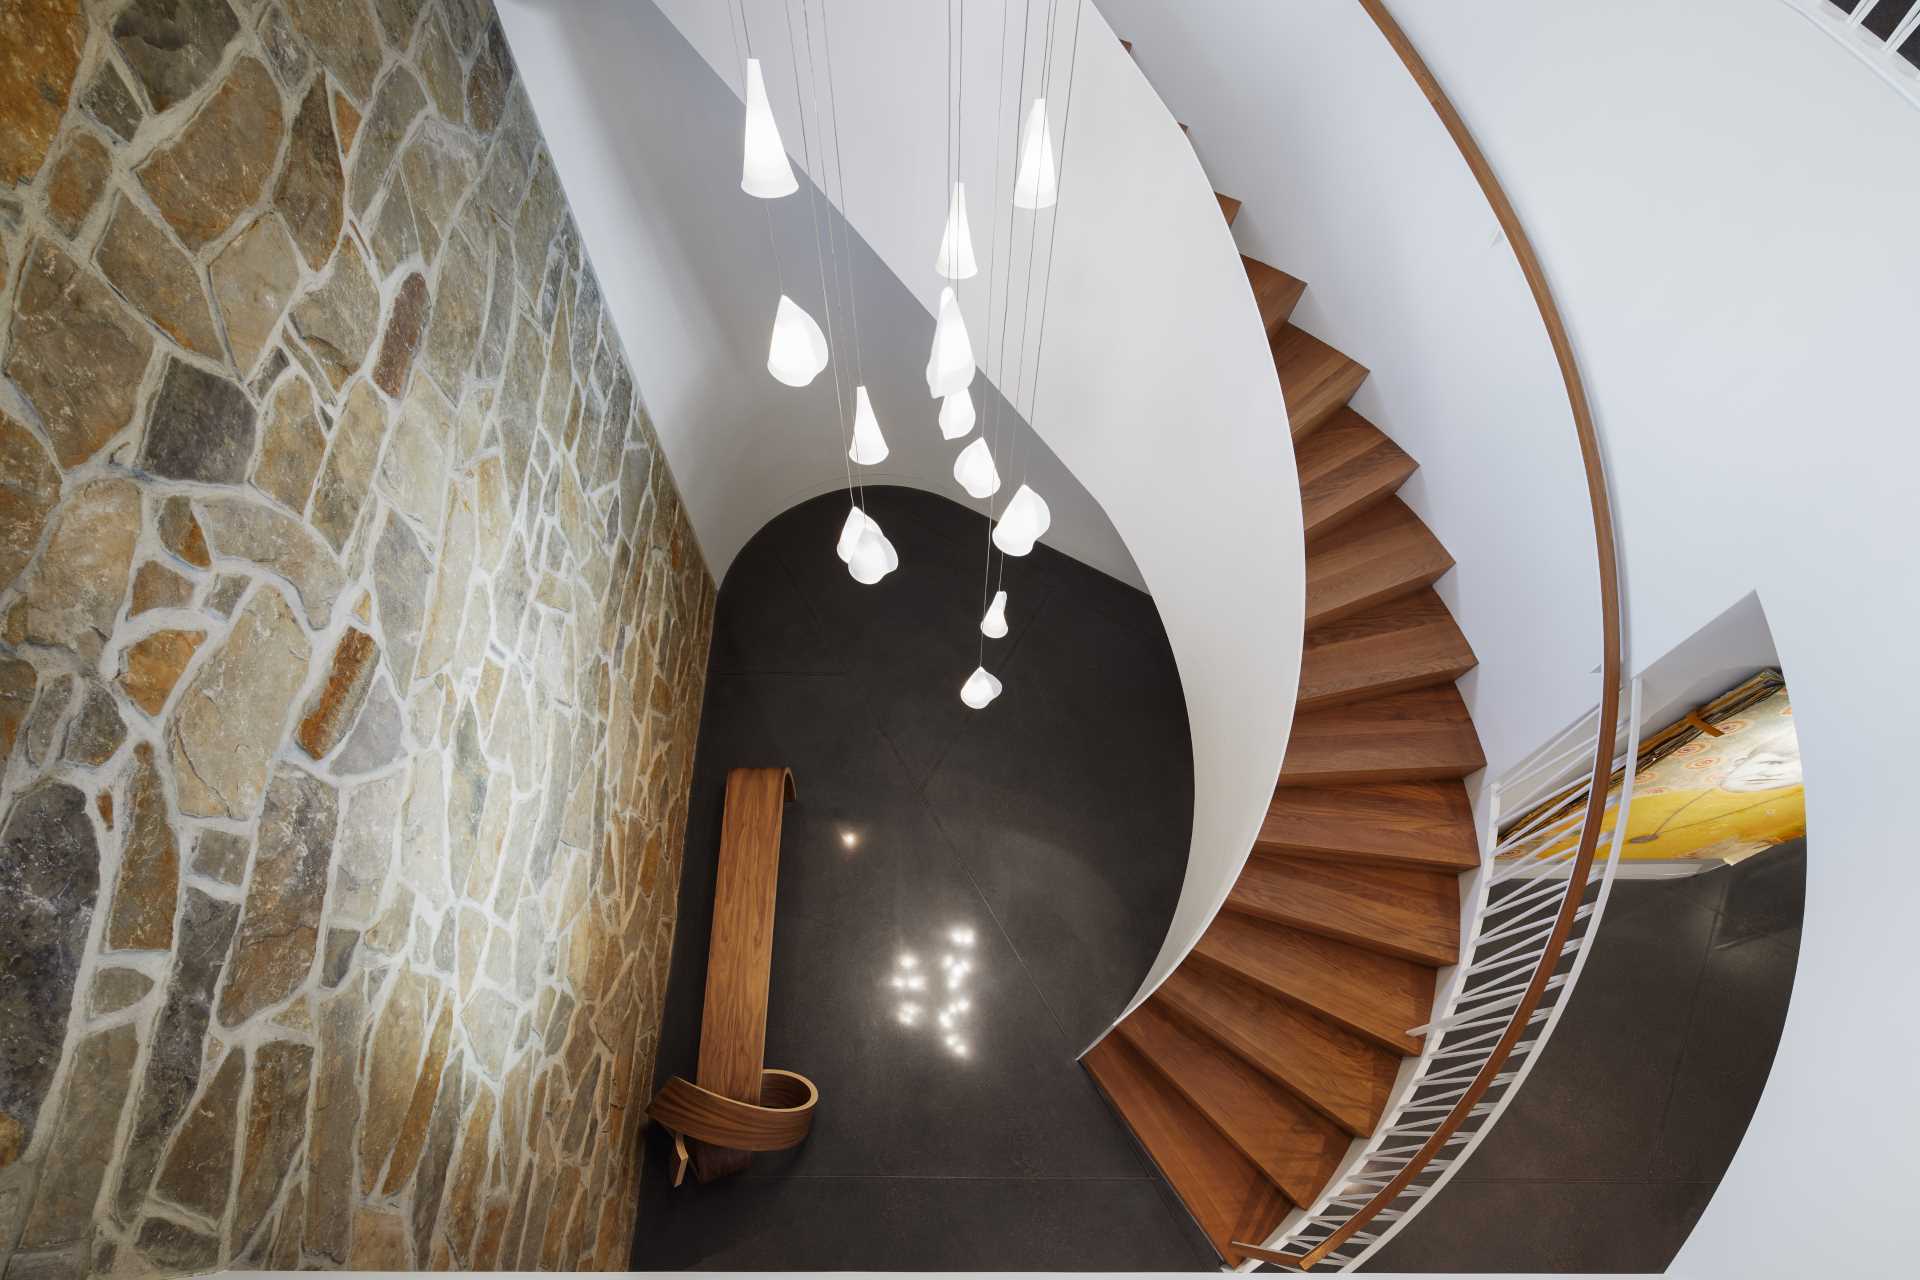 The staircase wraps around cascading pendant fixtures and directs attention towards the upstairs living areas.